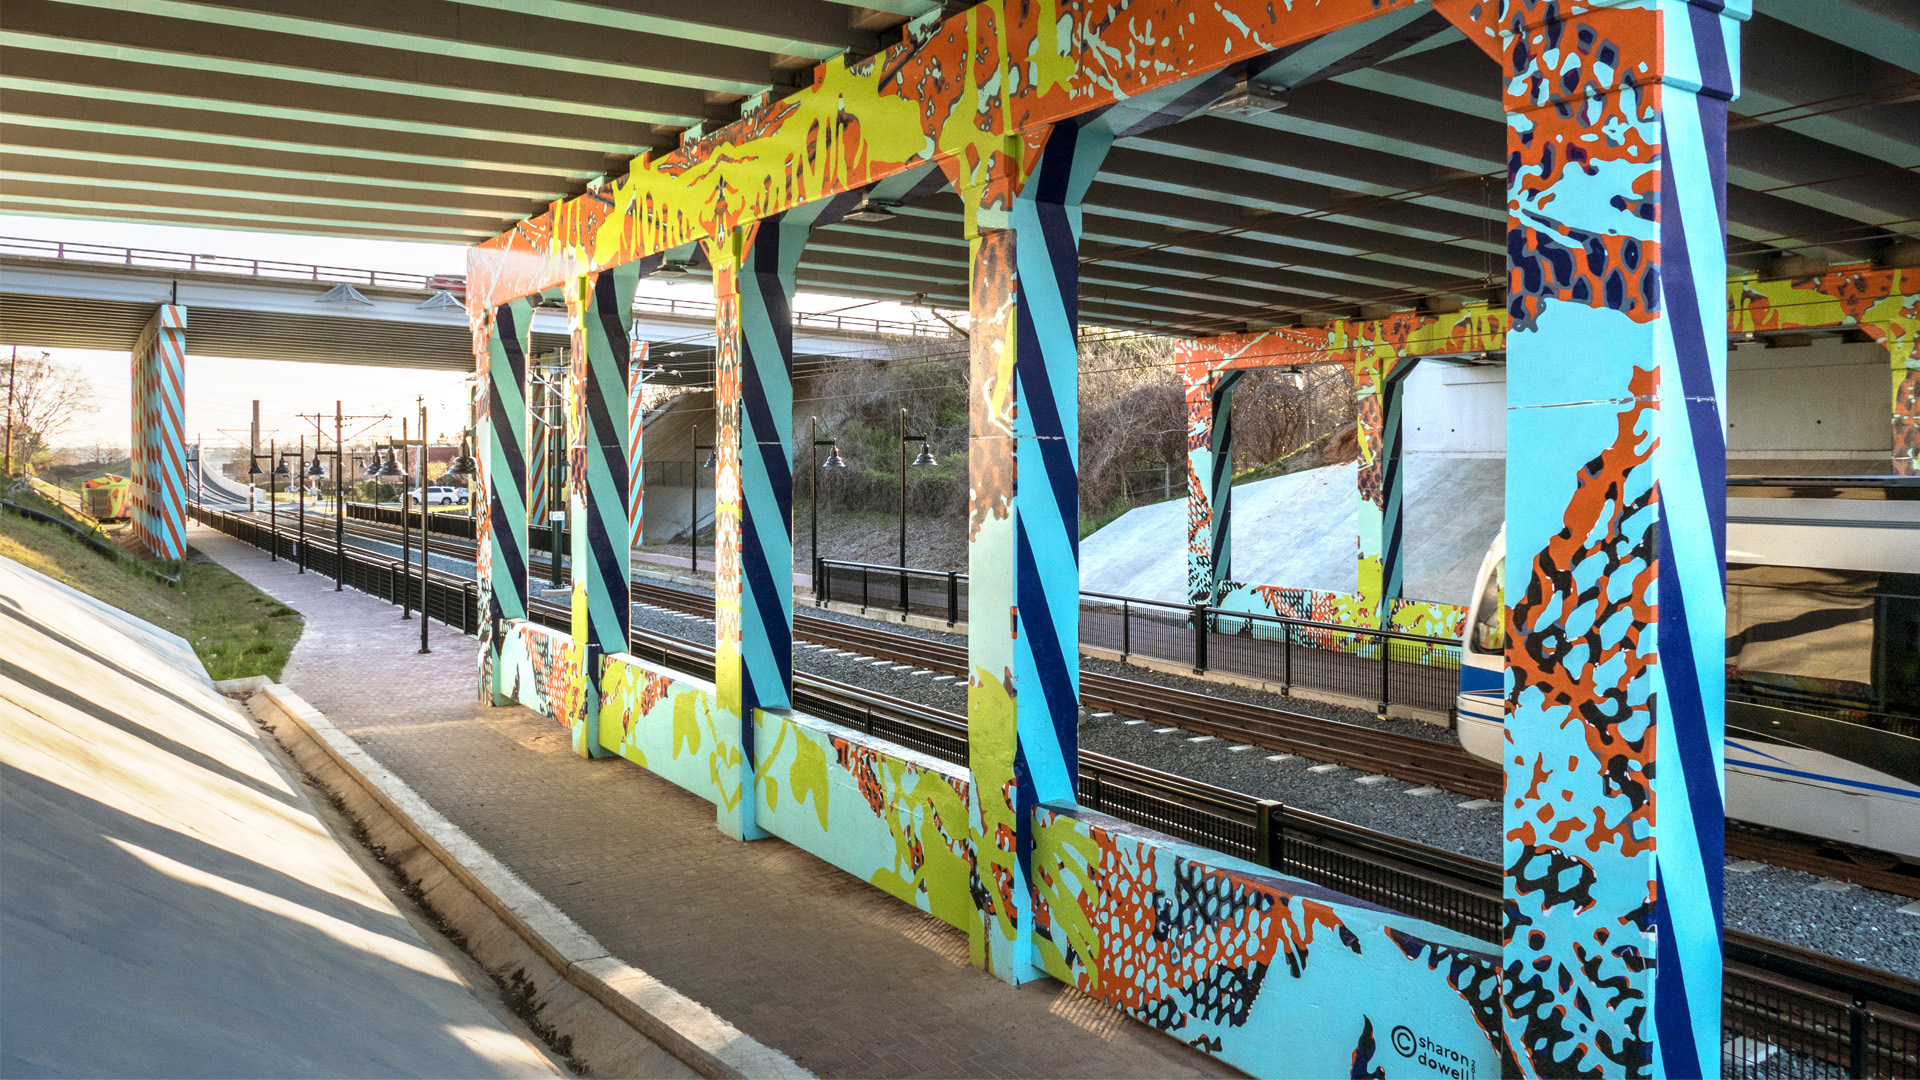 I-277 & 11th St underpass over light rail track & walkway in Charlotte. Painted in sky blue with cobalt blue & orange diagonal, repeating, lined patterns down sides of concrete support ballasts. Mesh-like & organic patterns in various bright colors throughout.